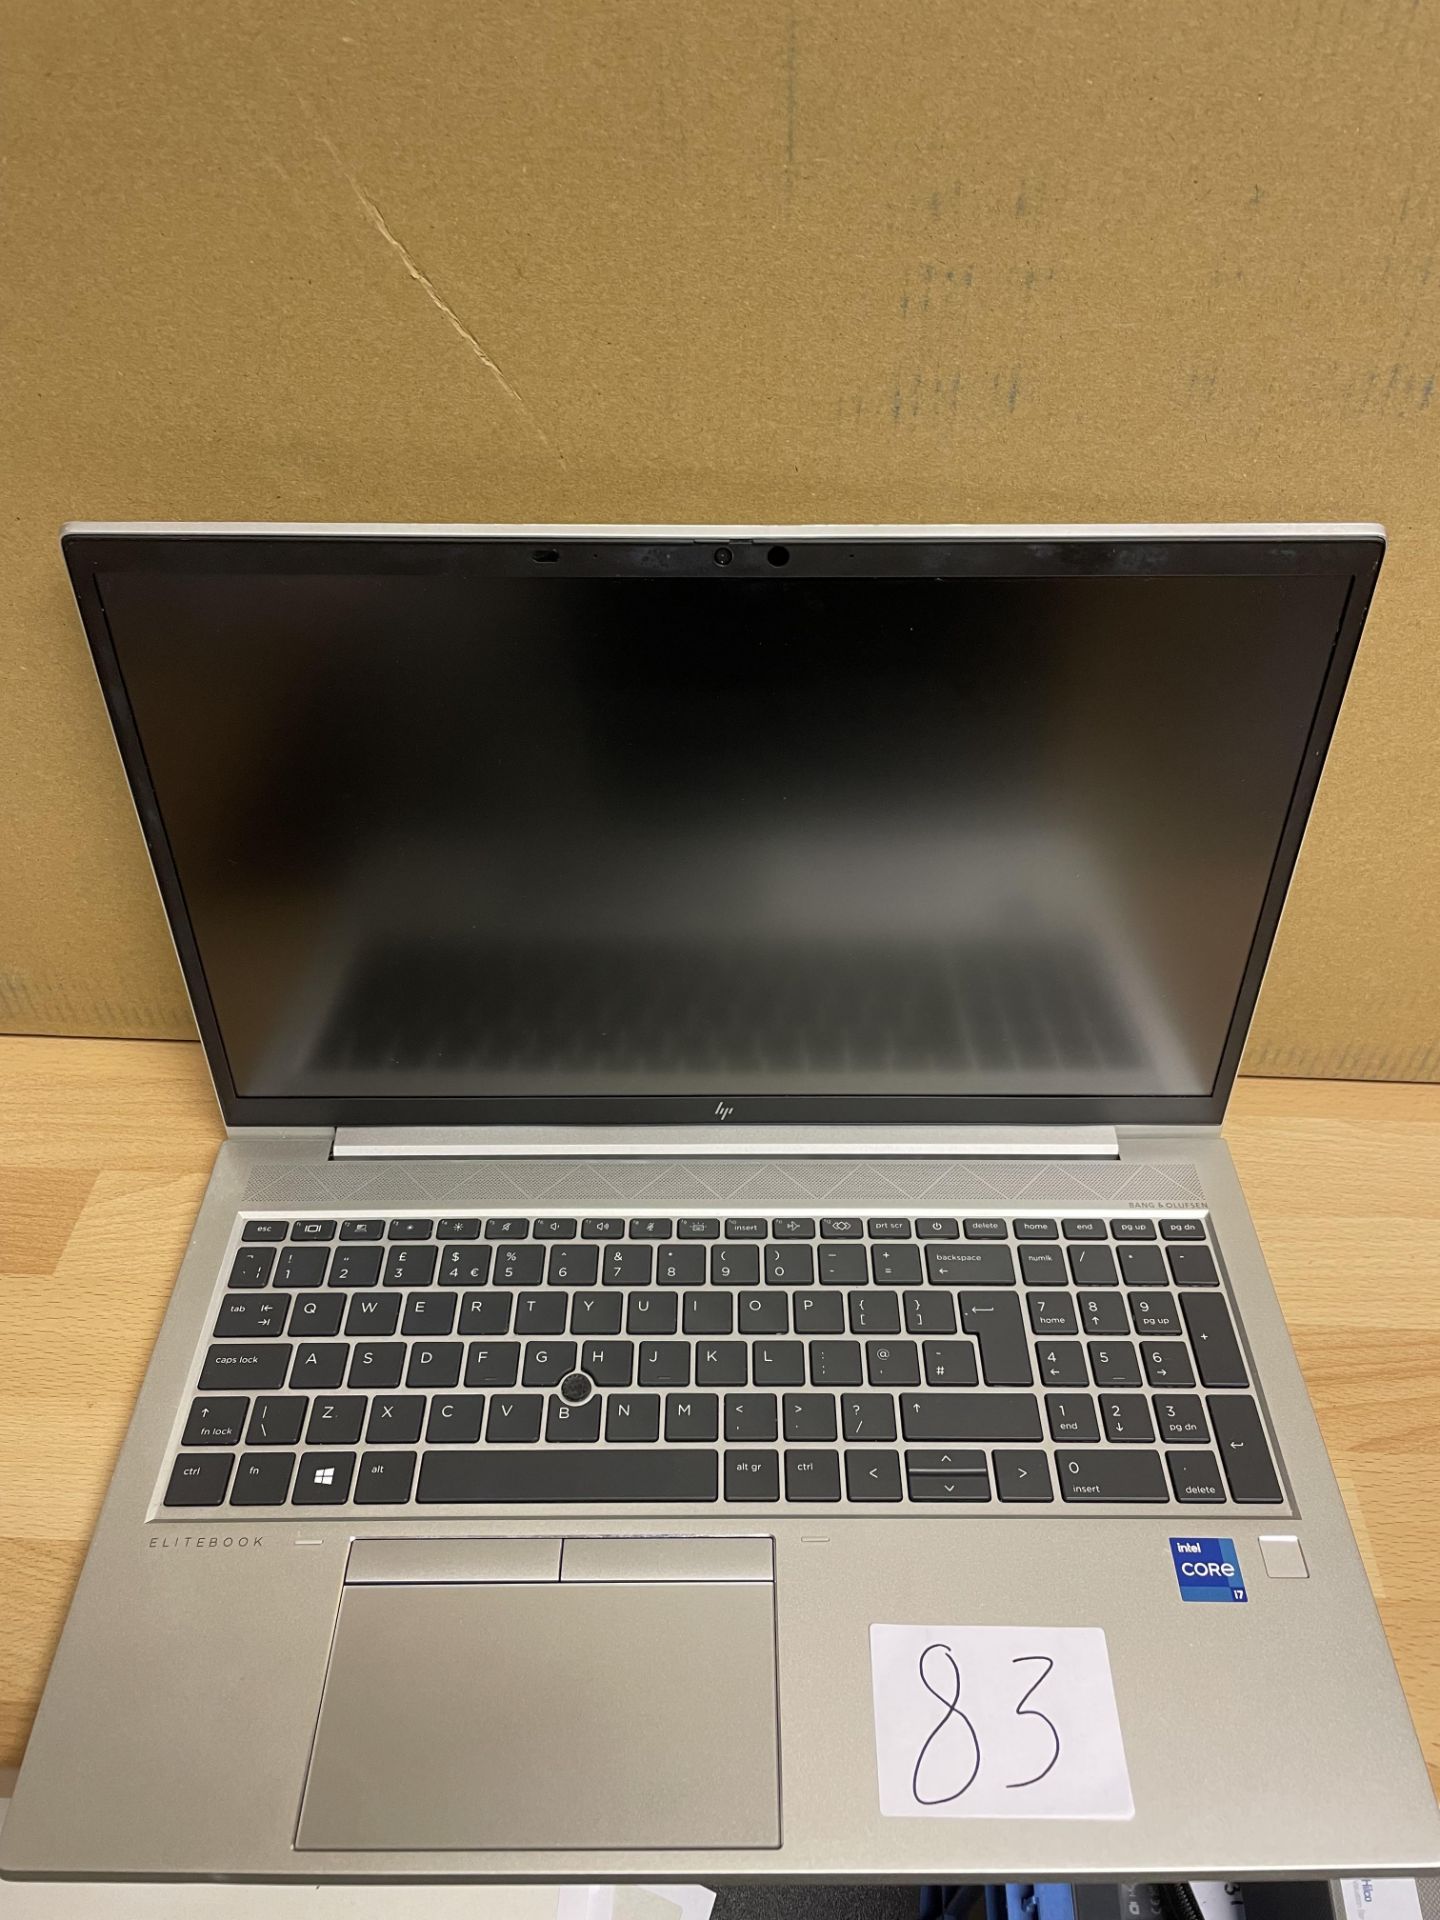 HP, EliteBook Core i7 850 G8, No charger or box, cosmetic wear / scratches on lid, Serial Number 5C